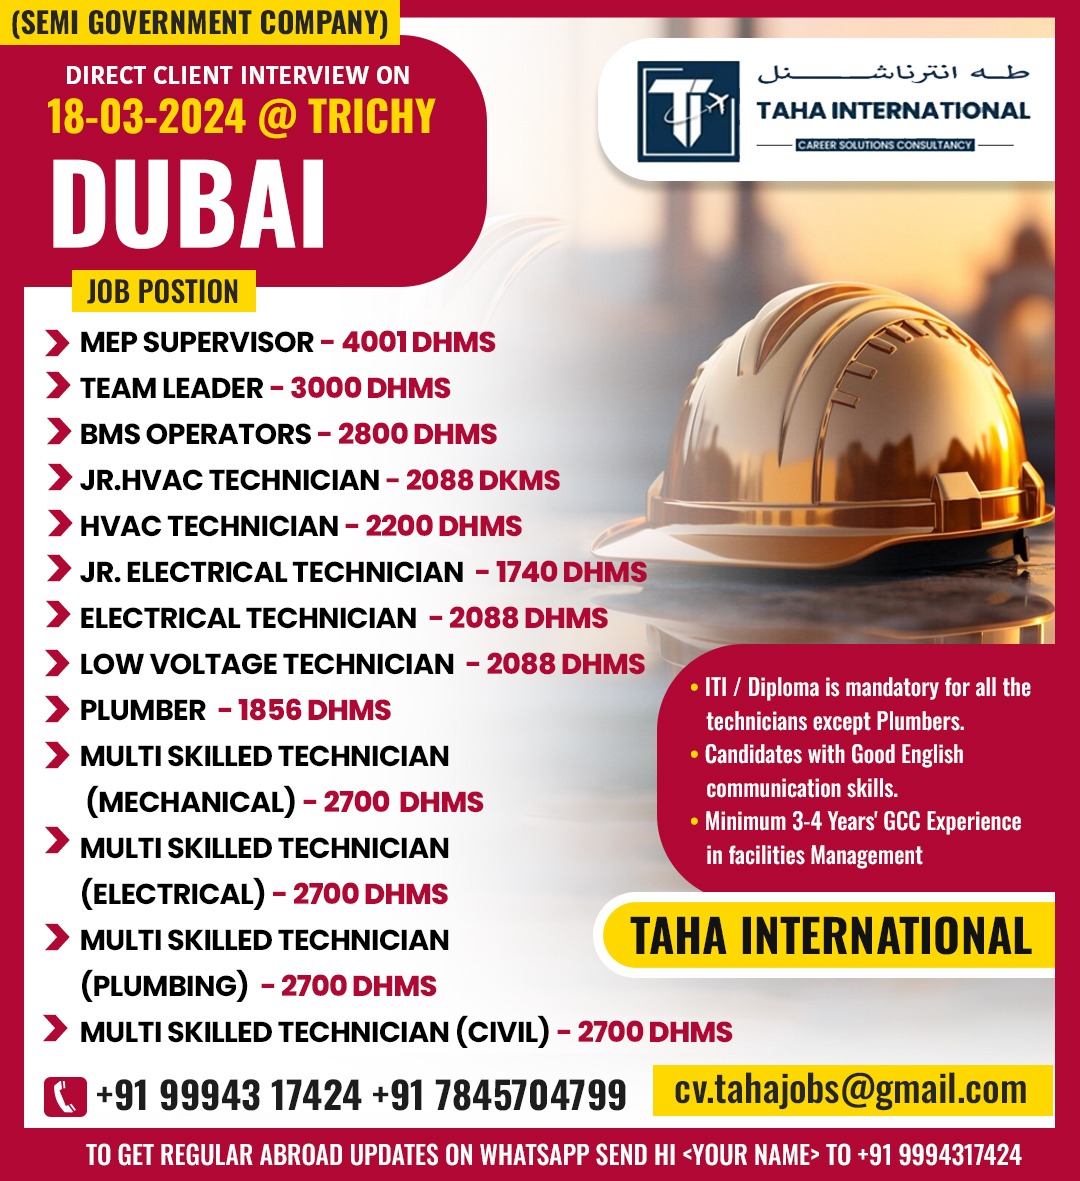 A LEADING SEMI GOVT COMPANY IN UAE – CLIENT INTERVIEW ON 18TH MARCH 2024 @ TRICHY